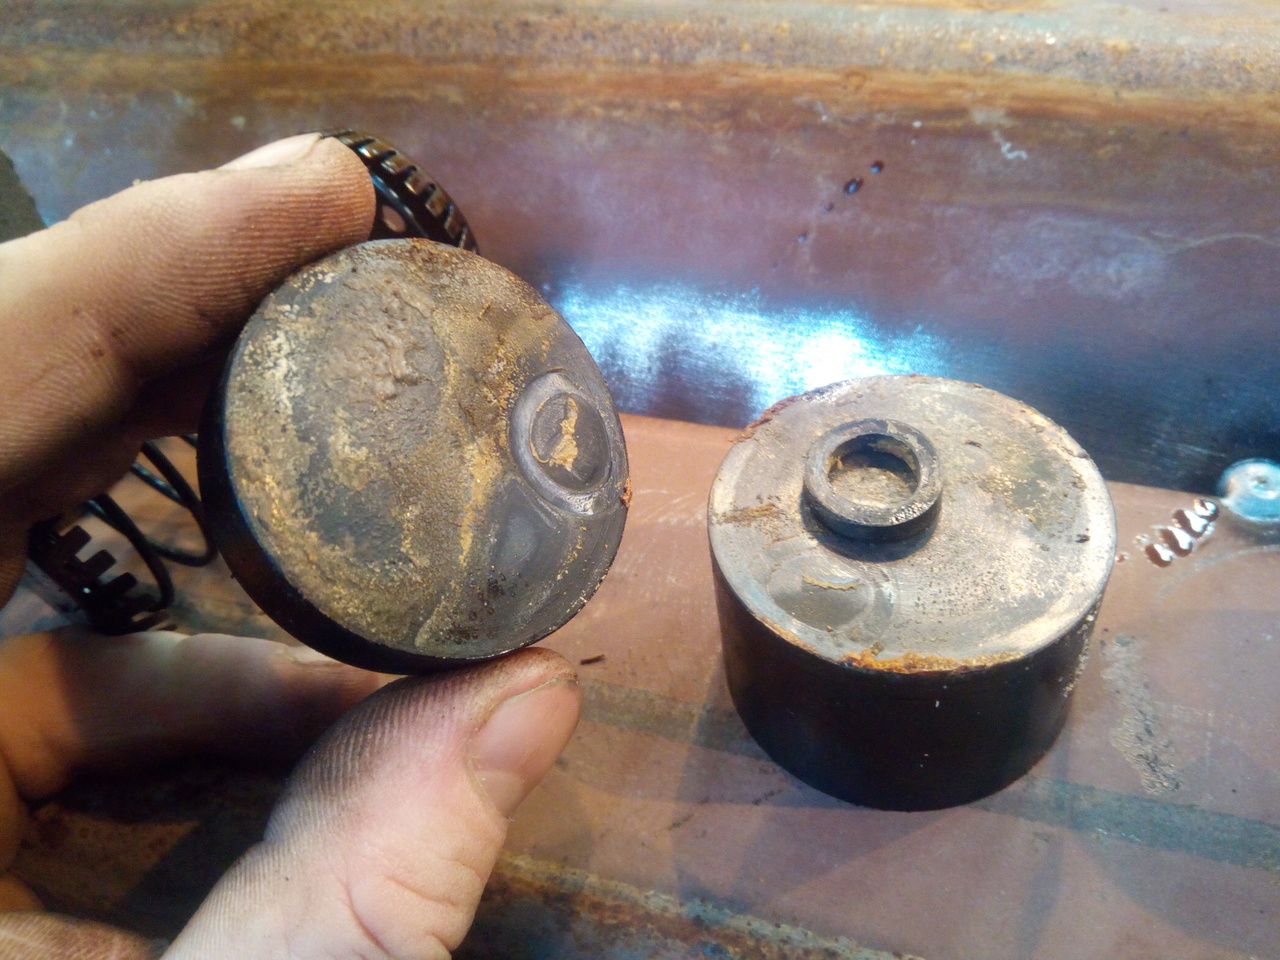 A hand lifting off the tilted cup-seal, revealing a square
section o-ring trapped beneath it